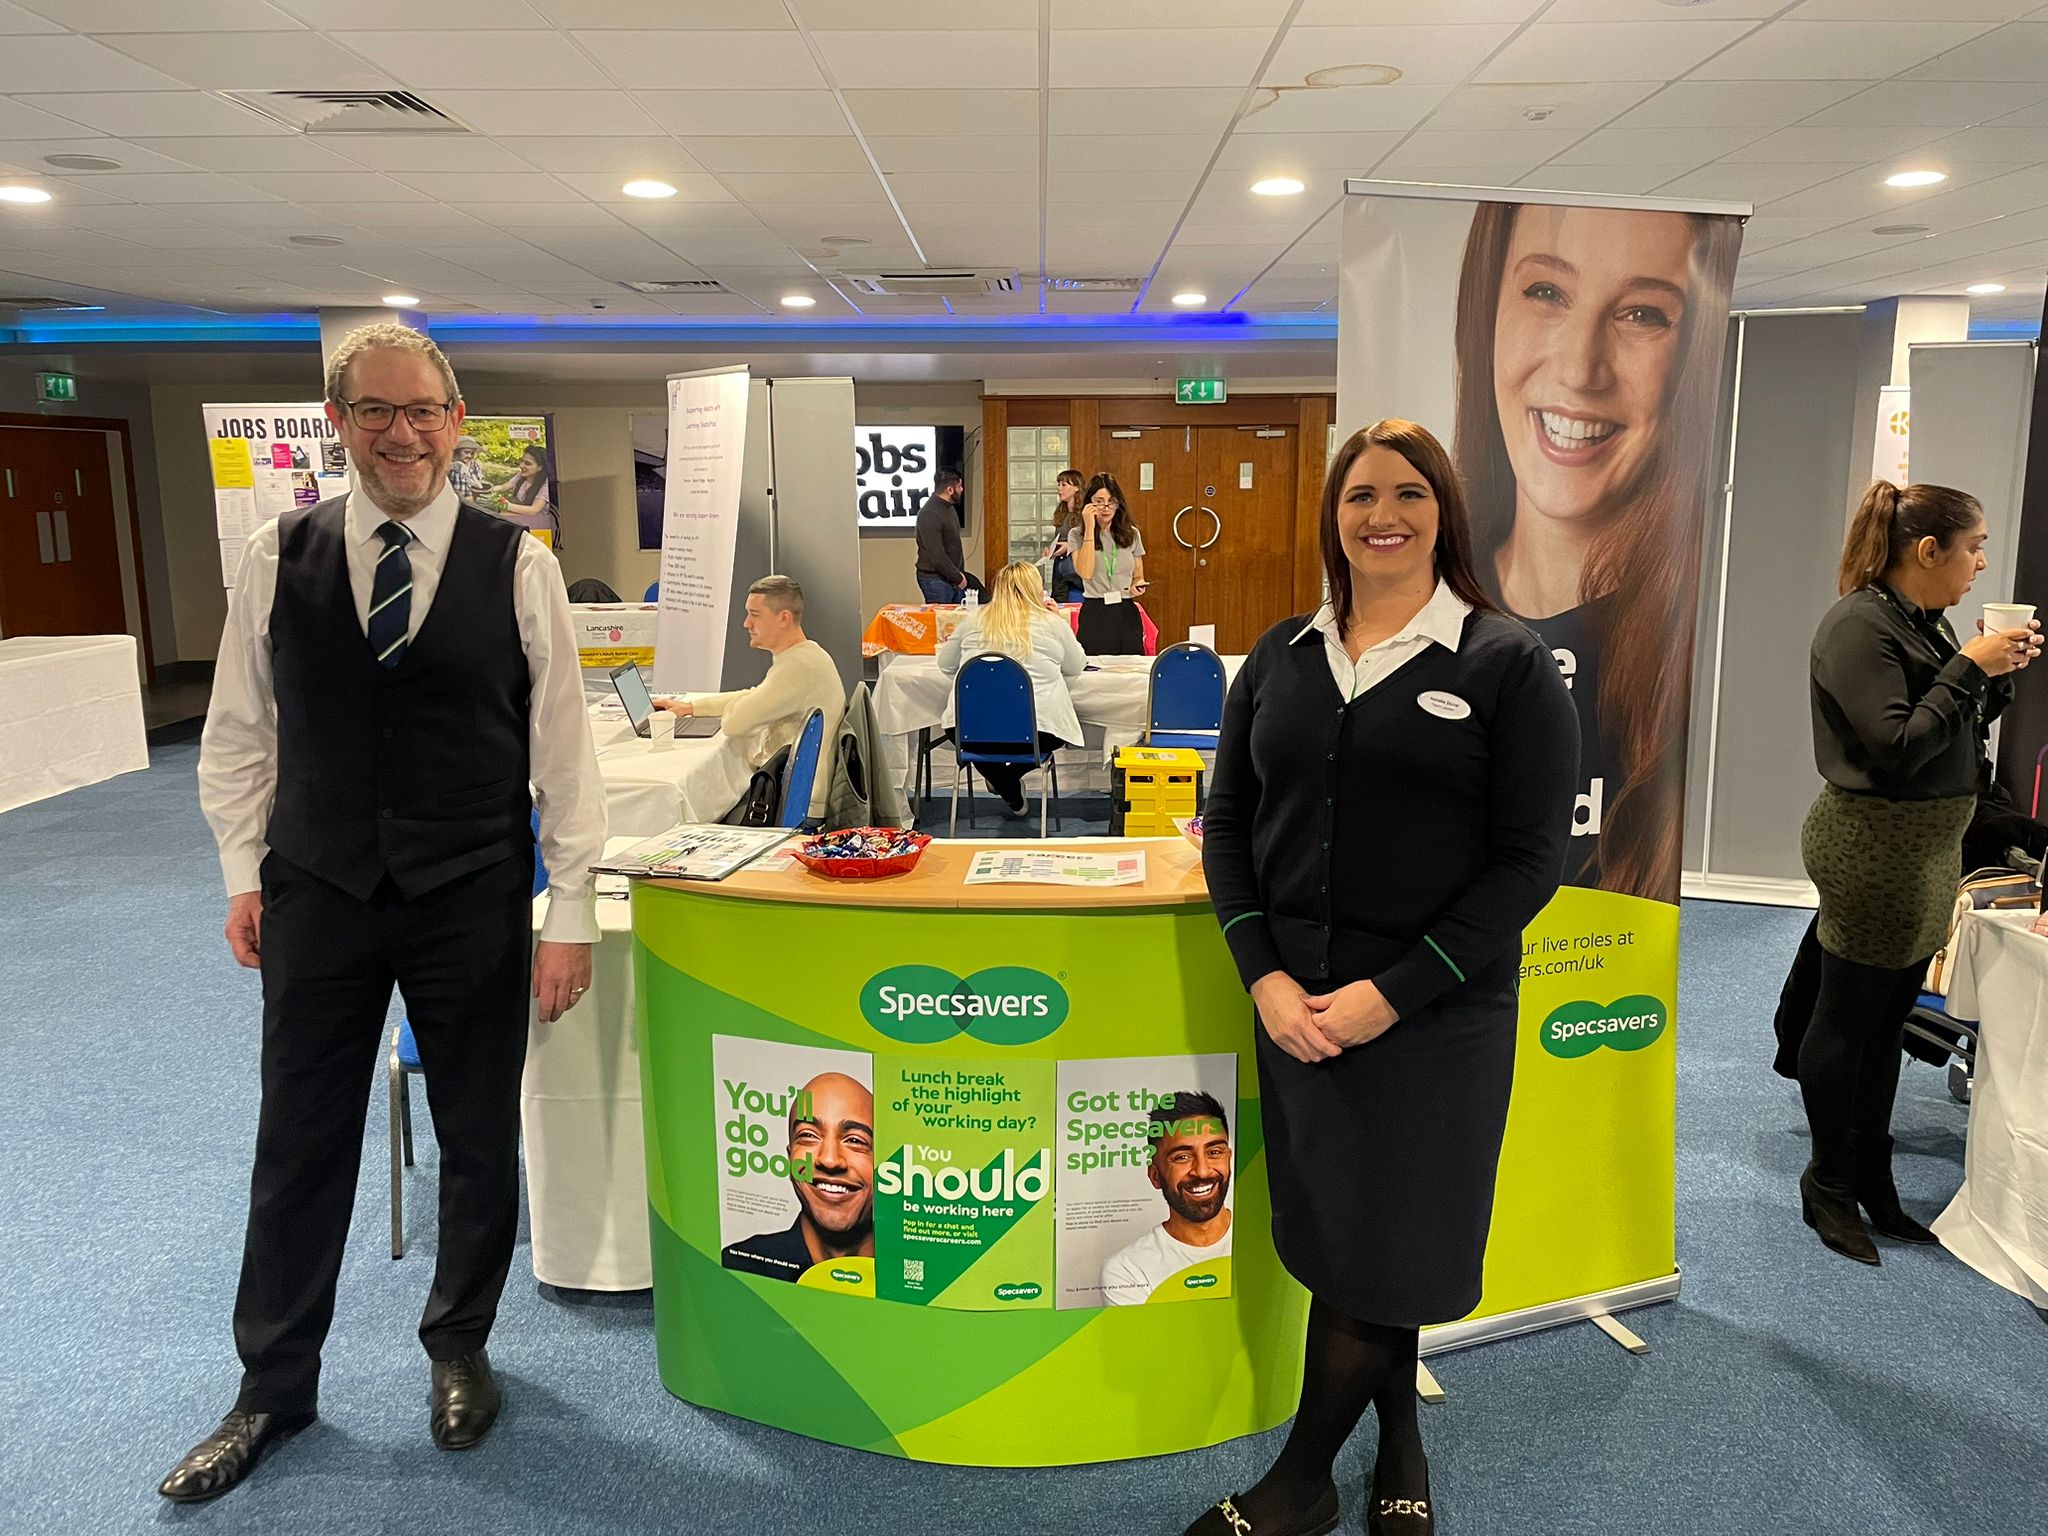 Specsavers at our event in Preston